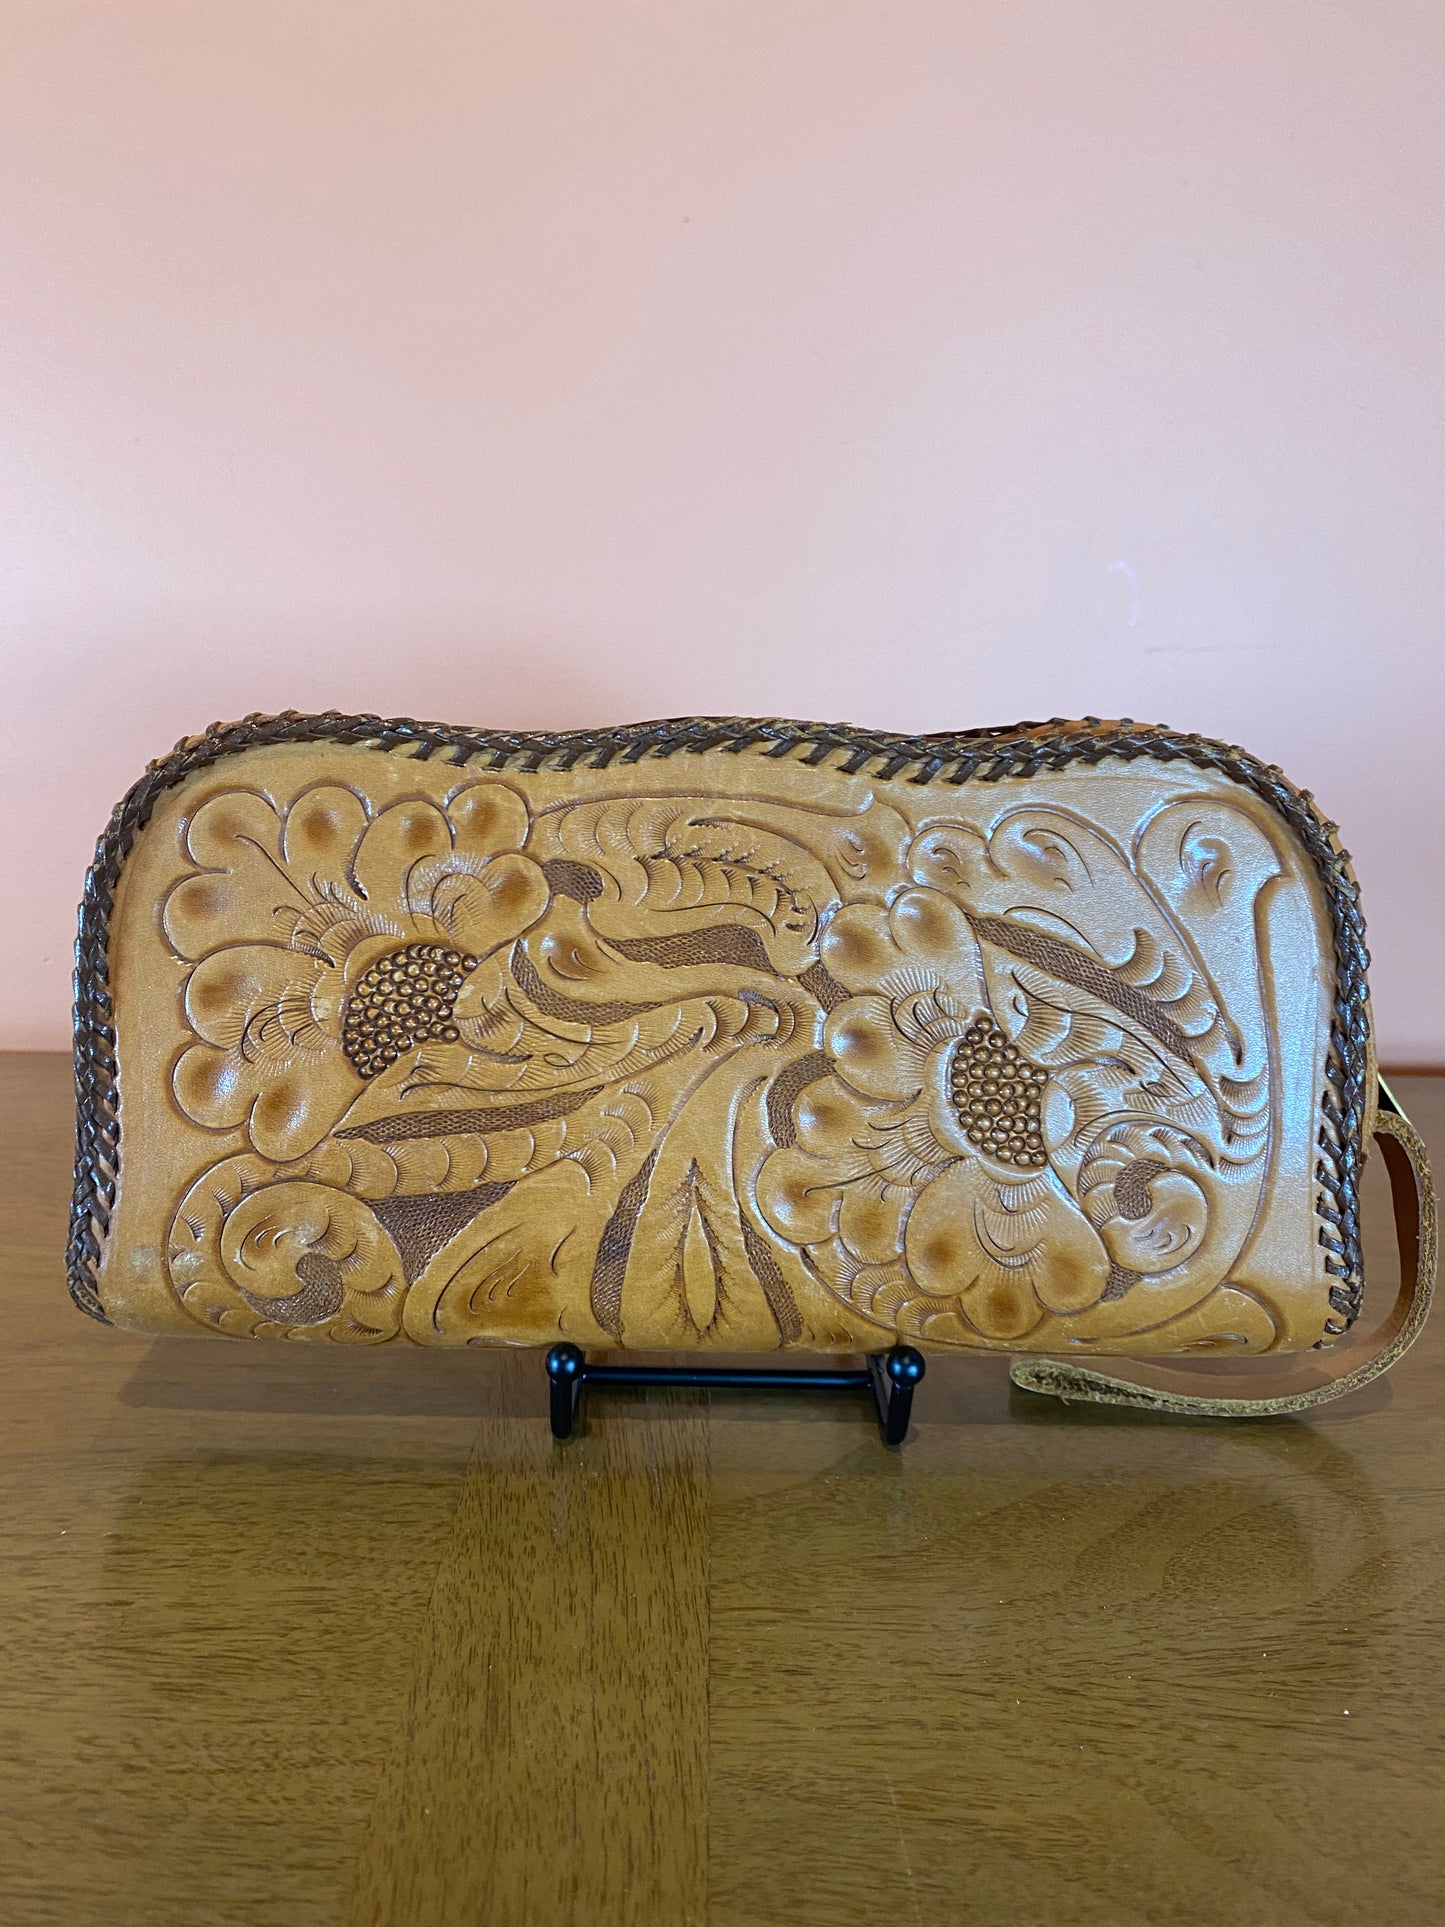 Vintage 70's Tooled Leather  Square Clutch